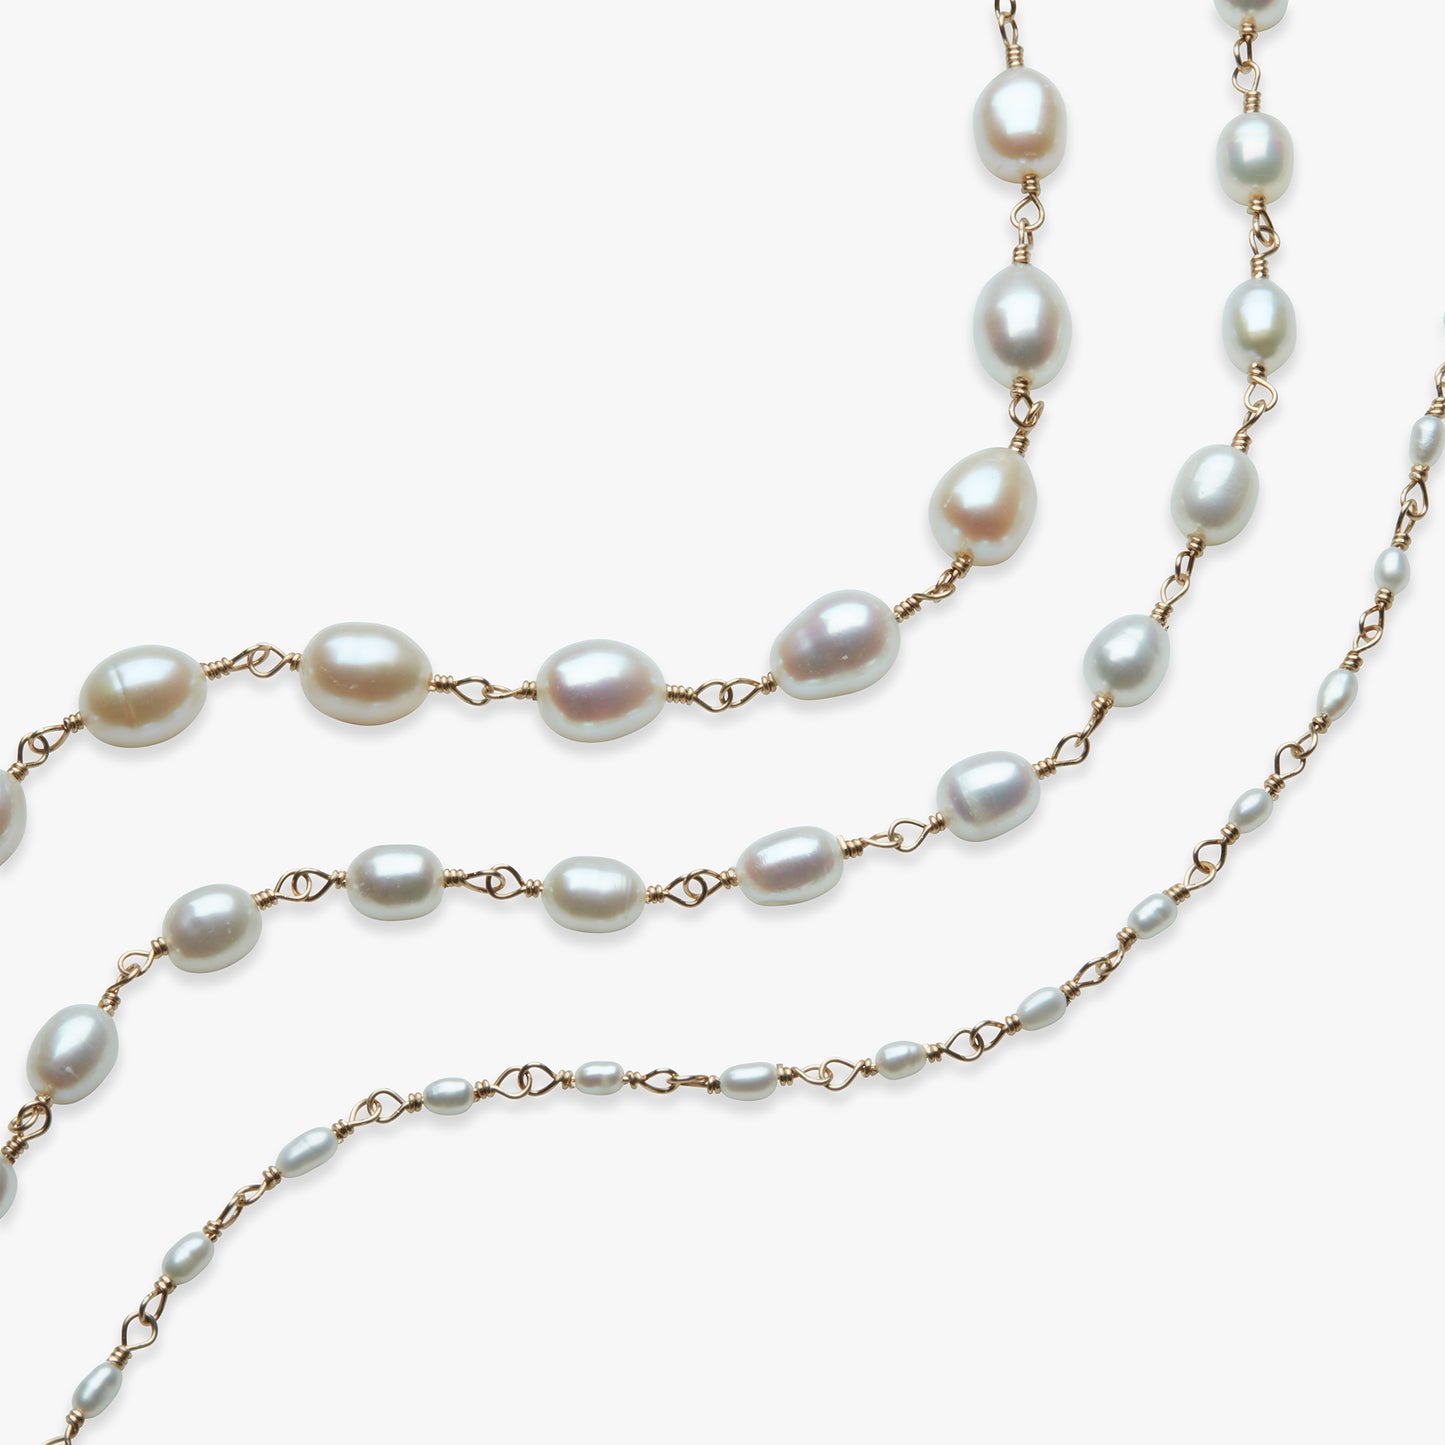 Pearl rosary necklace gold filled